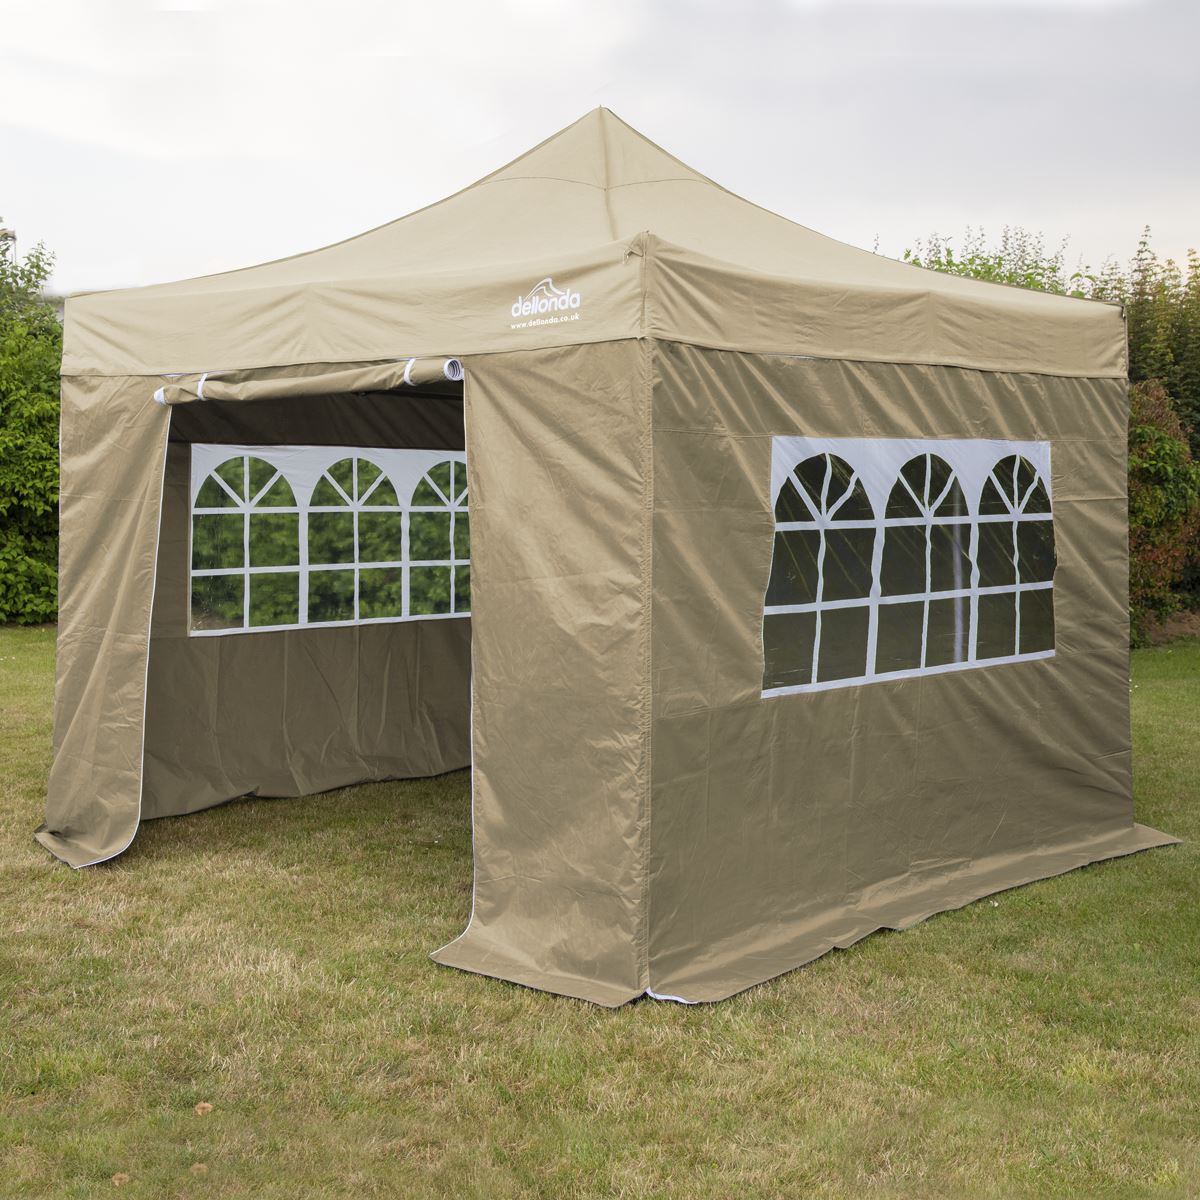 Dellonda Premium 3x3m Pop-Up Gazebo & Side Walls, PVC Coated, Water Resistant Fabric with Carry Bag, Rope, Stakes & Weight Bags - Beige